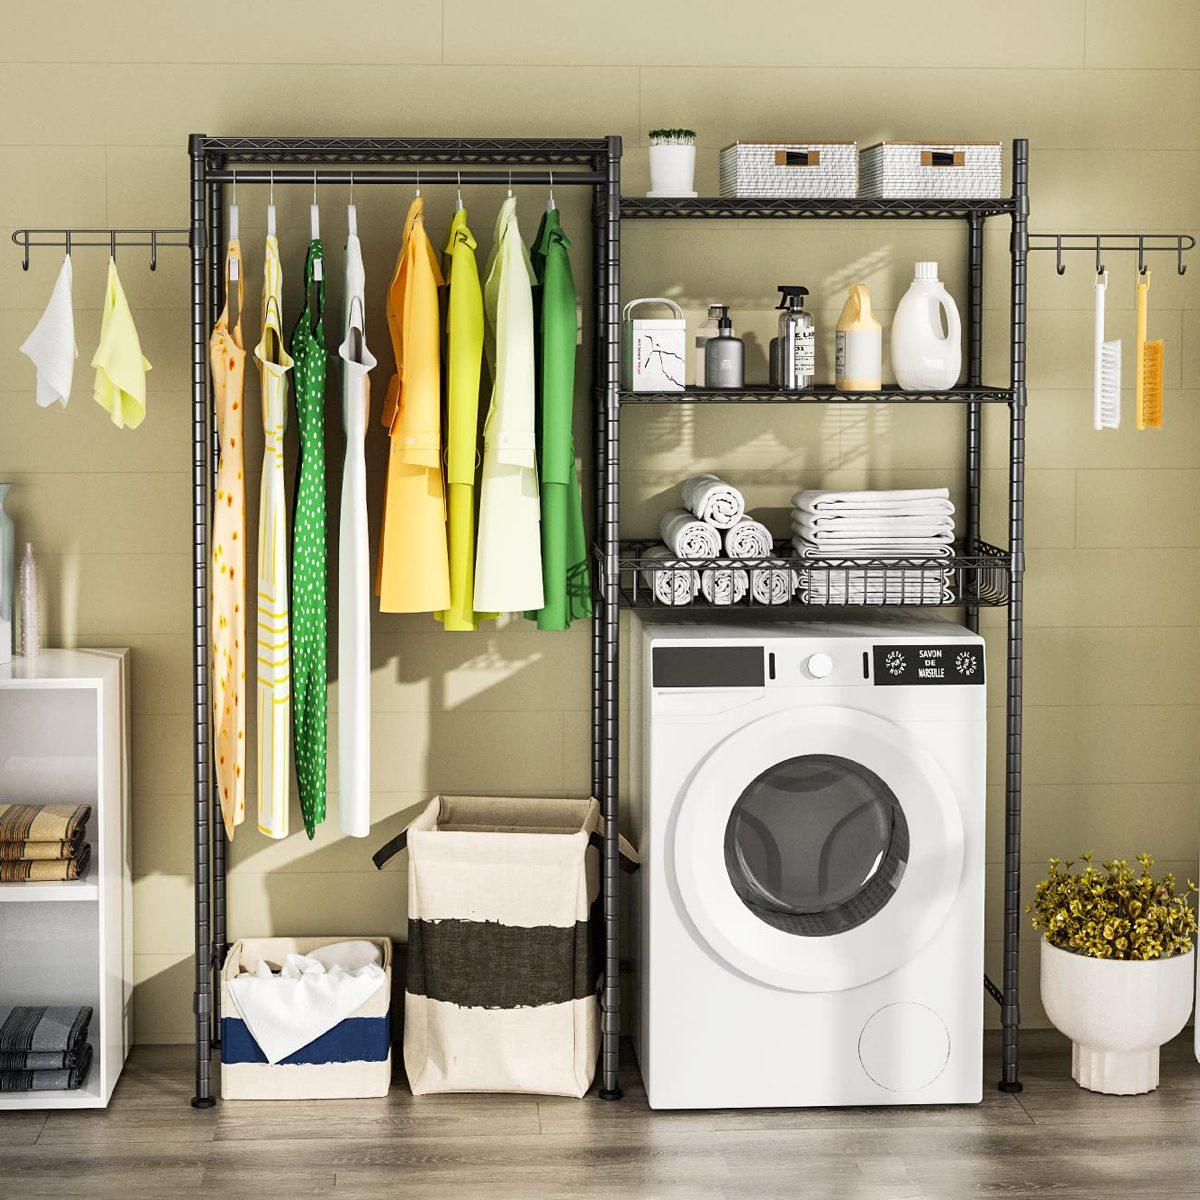 10 Best Laundry Room Shelving Ideas for Optimized Storage